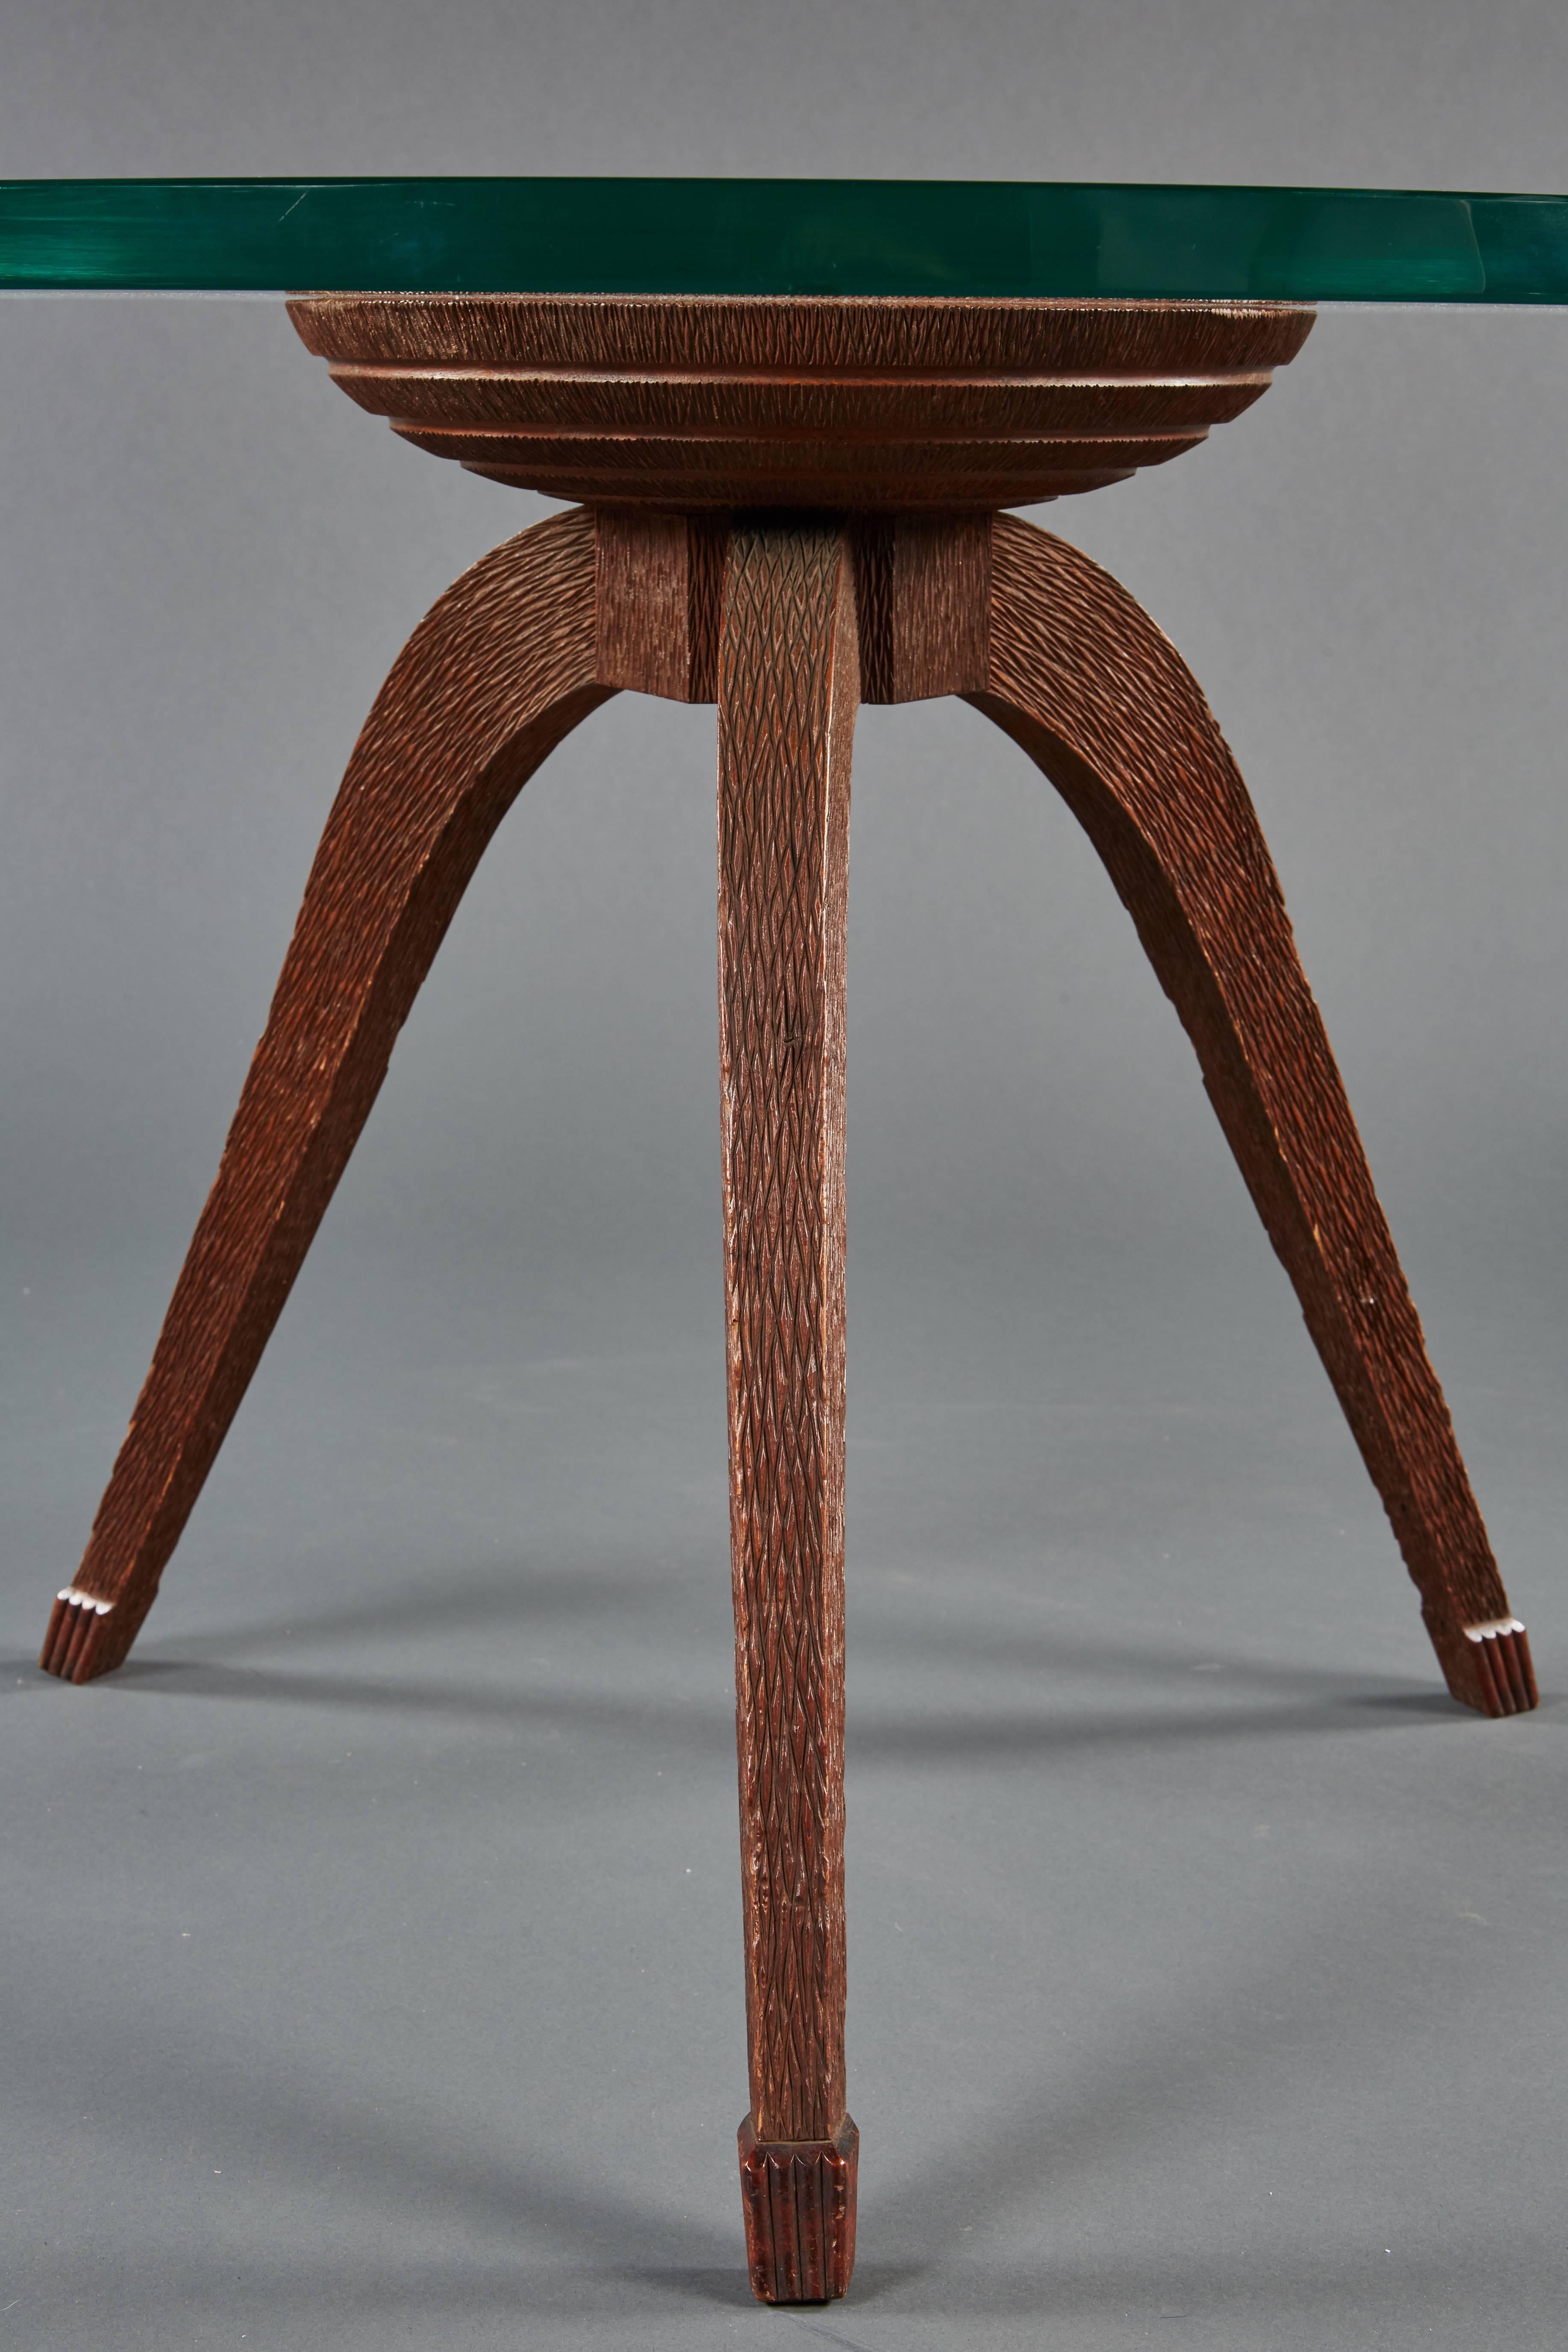 20th Century Rare and Spectacular Osvaldo Borsani Chiselled and Hand-Craved Wood Low Table For Sale